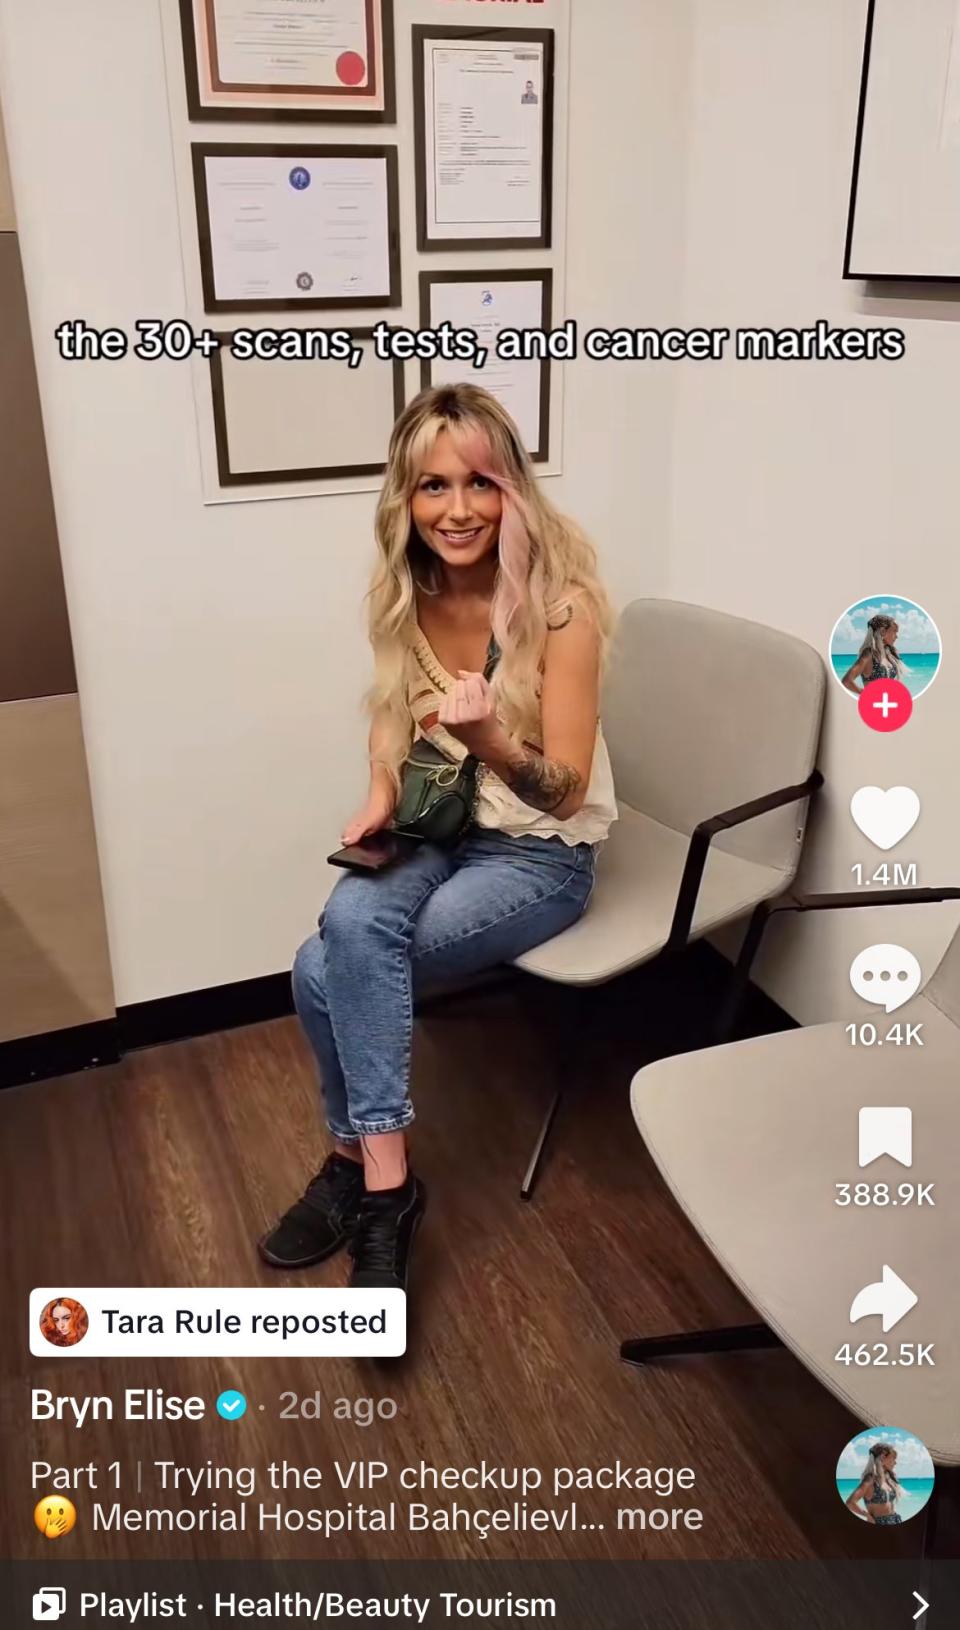 Bryn Elise sits in a hospital waiting area holding a phone, caption reads "the 30+ scans, tests, and cancer markers." The video has 1.4M views, 10.4K comments, 388.9K likes, and 462.5K shares